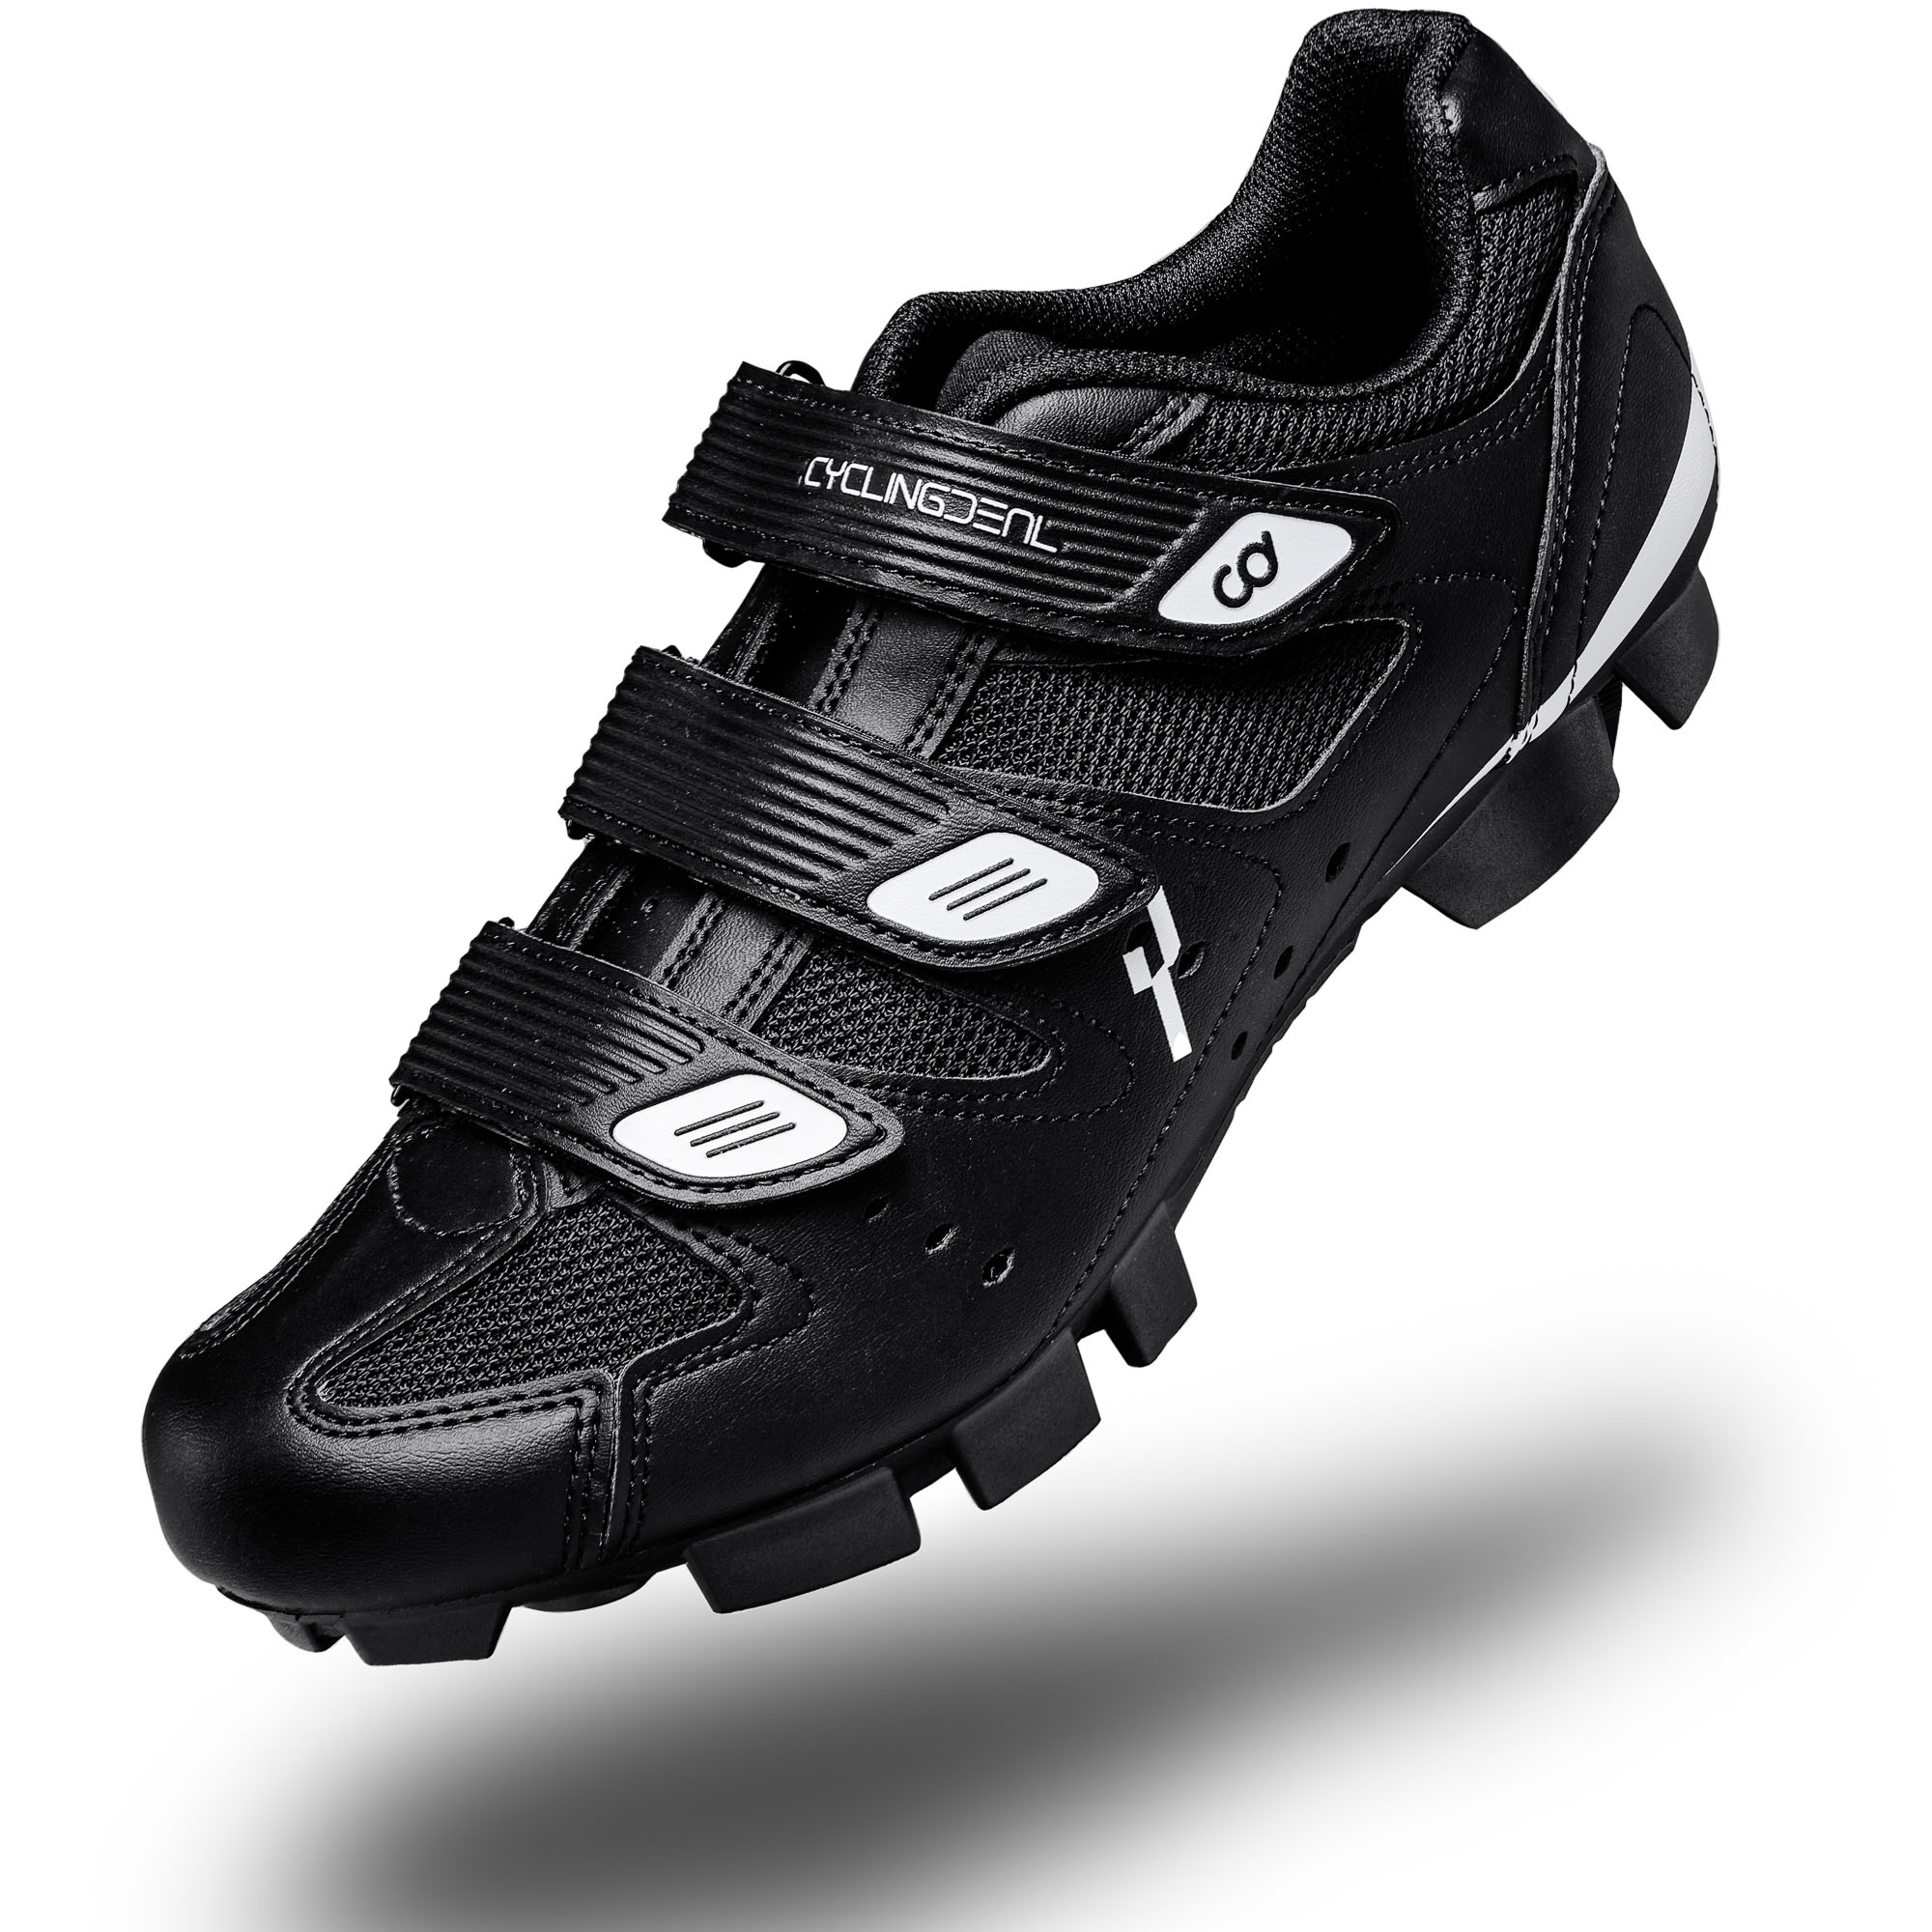 CyclingDeal Mountain Bicycle Bike Men's MTB Cycling Shoes Black Compatible with SHIMANO SPD and CrankBrothers Cleats | Size 47